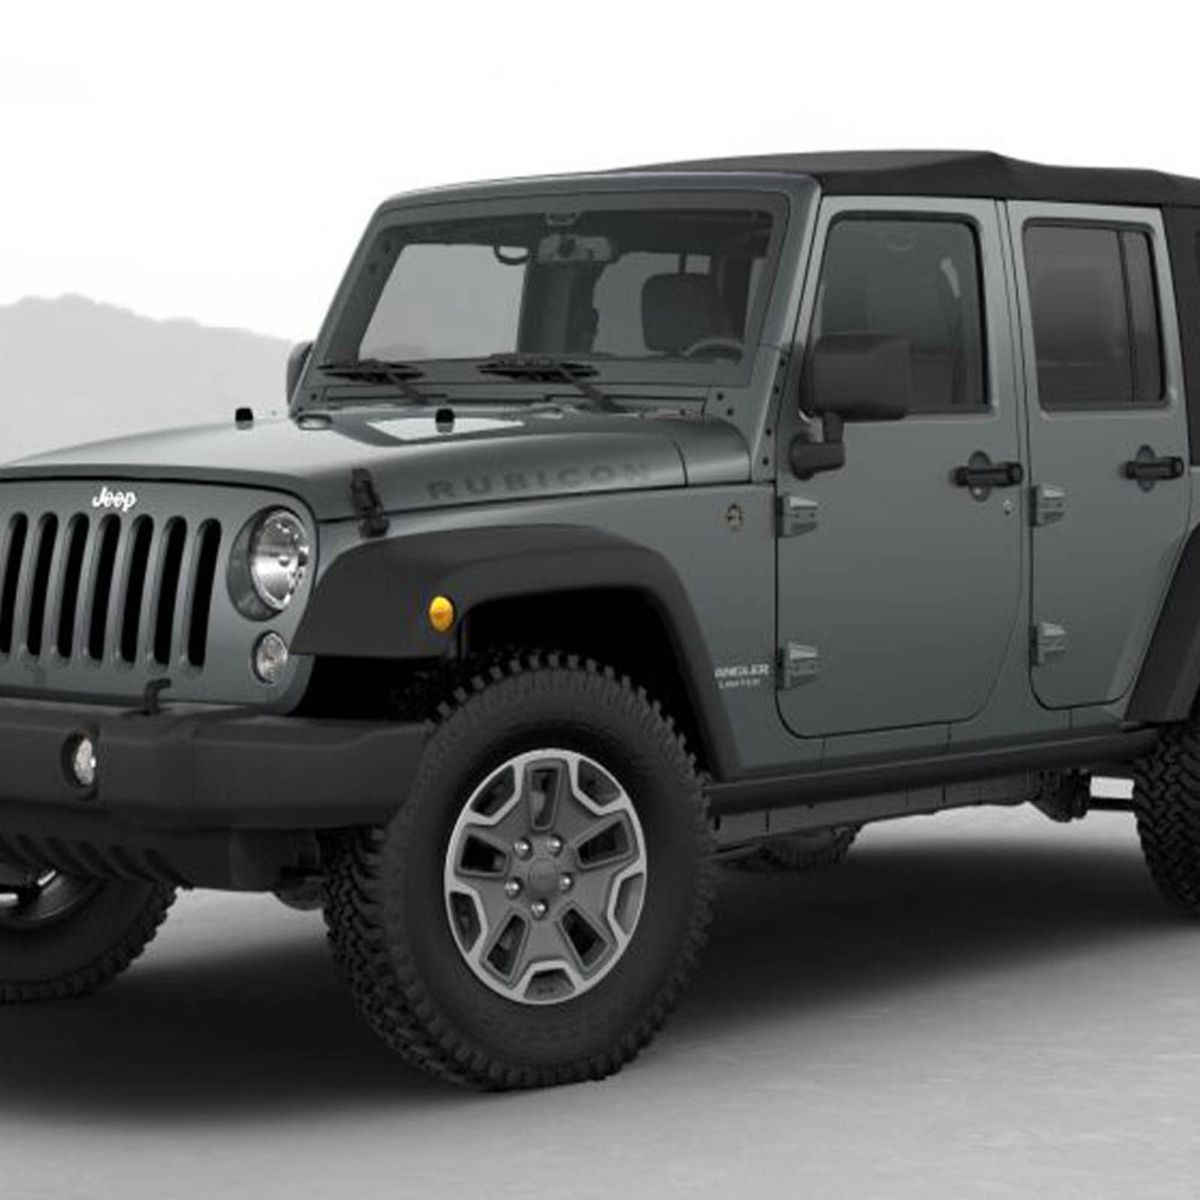 2016 Jeep Wrangler Rubicon: Welcome to our newest long-termer